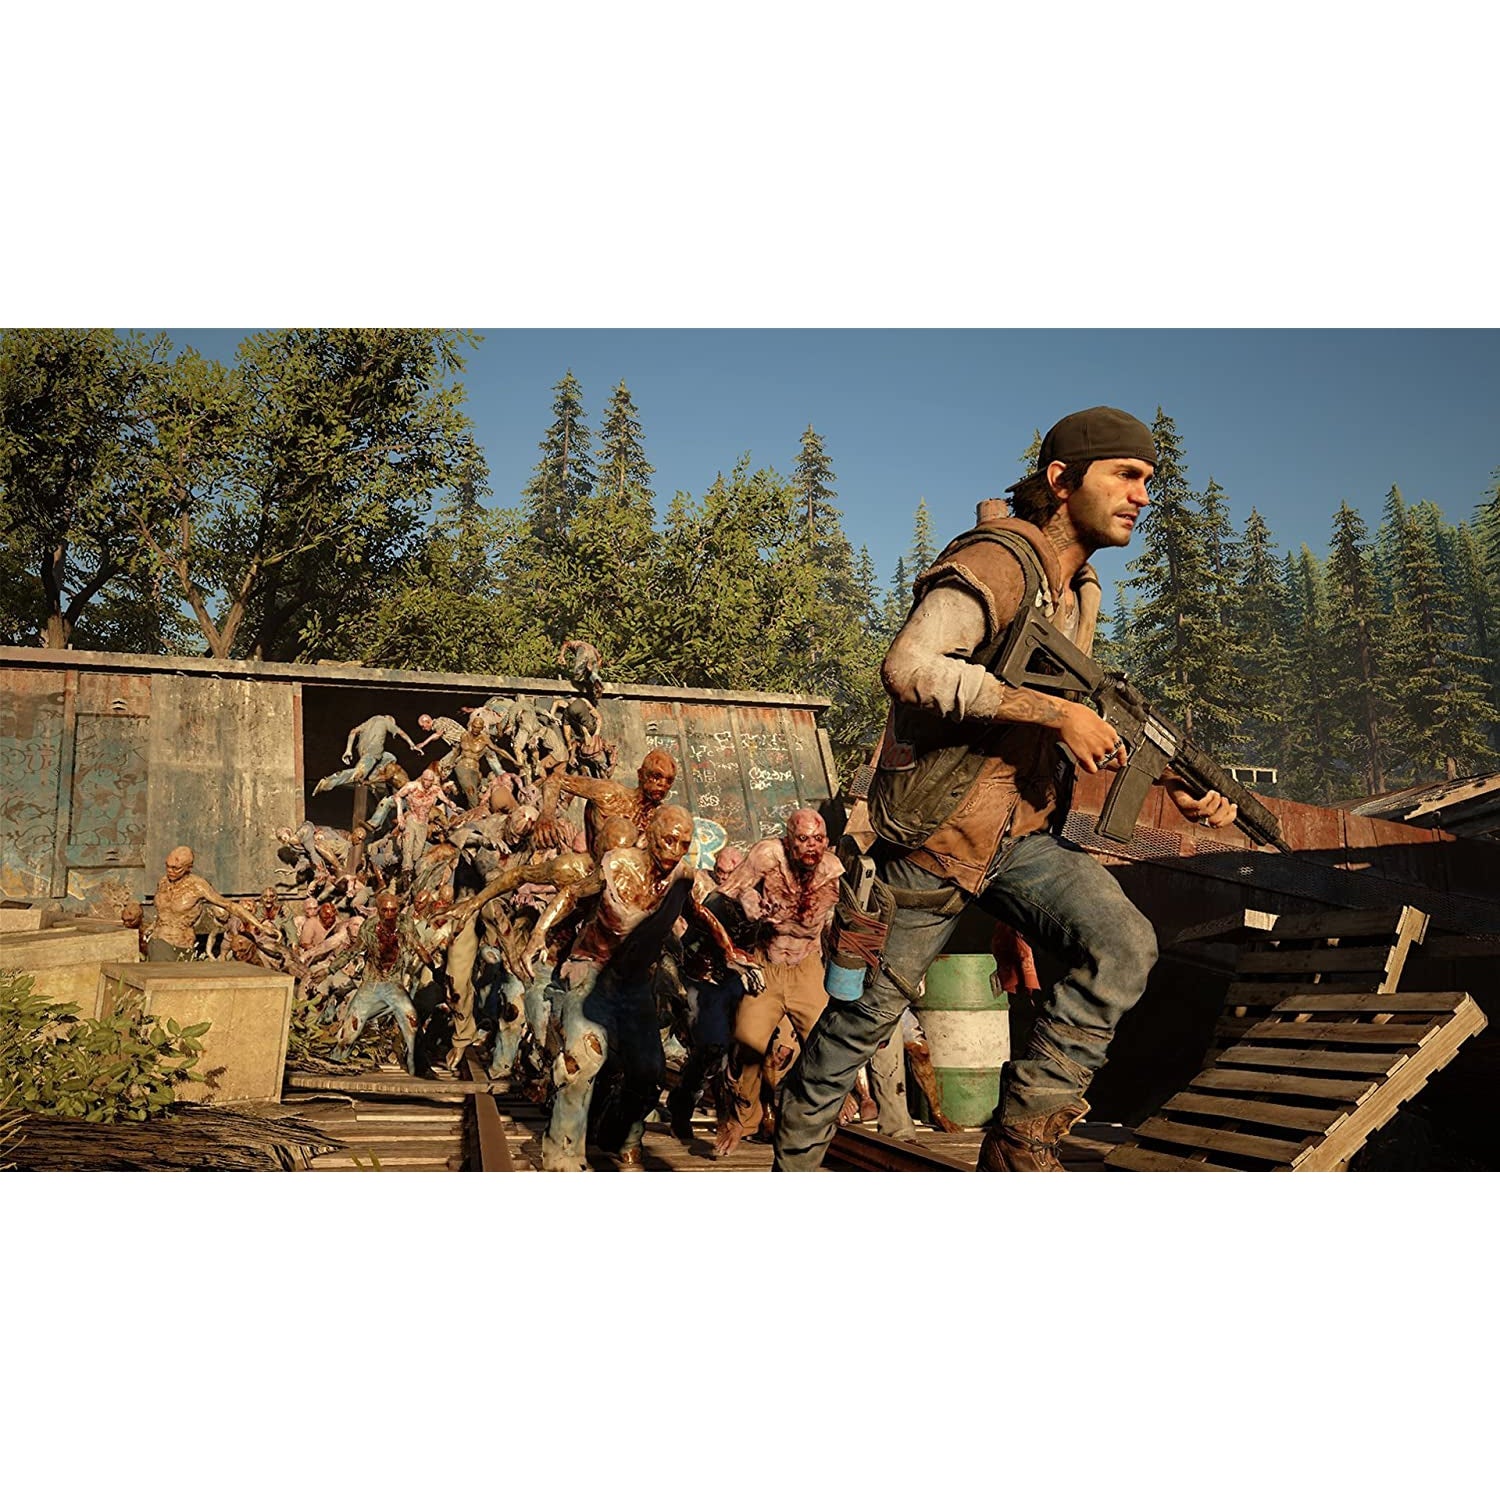 Days Gone - PlayStation 4 - Used